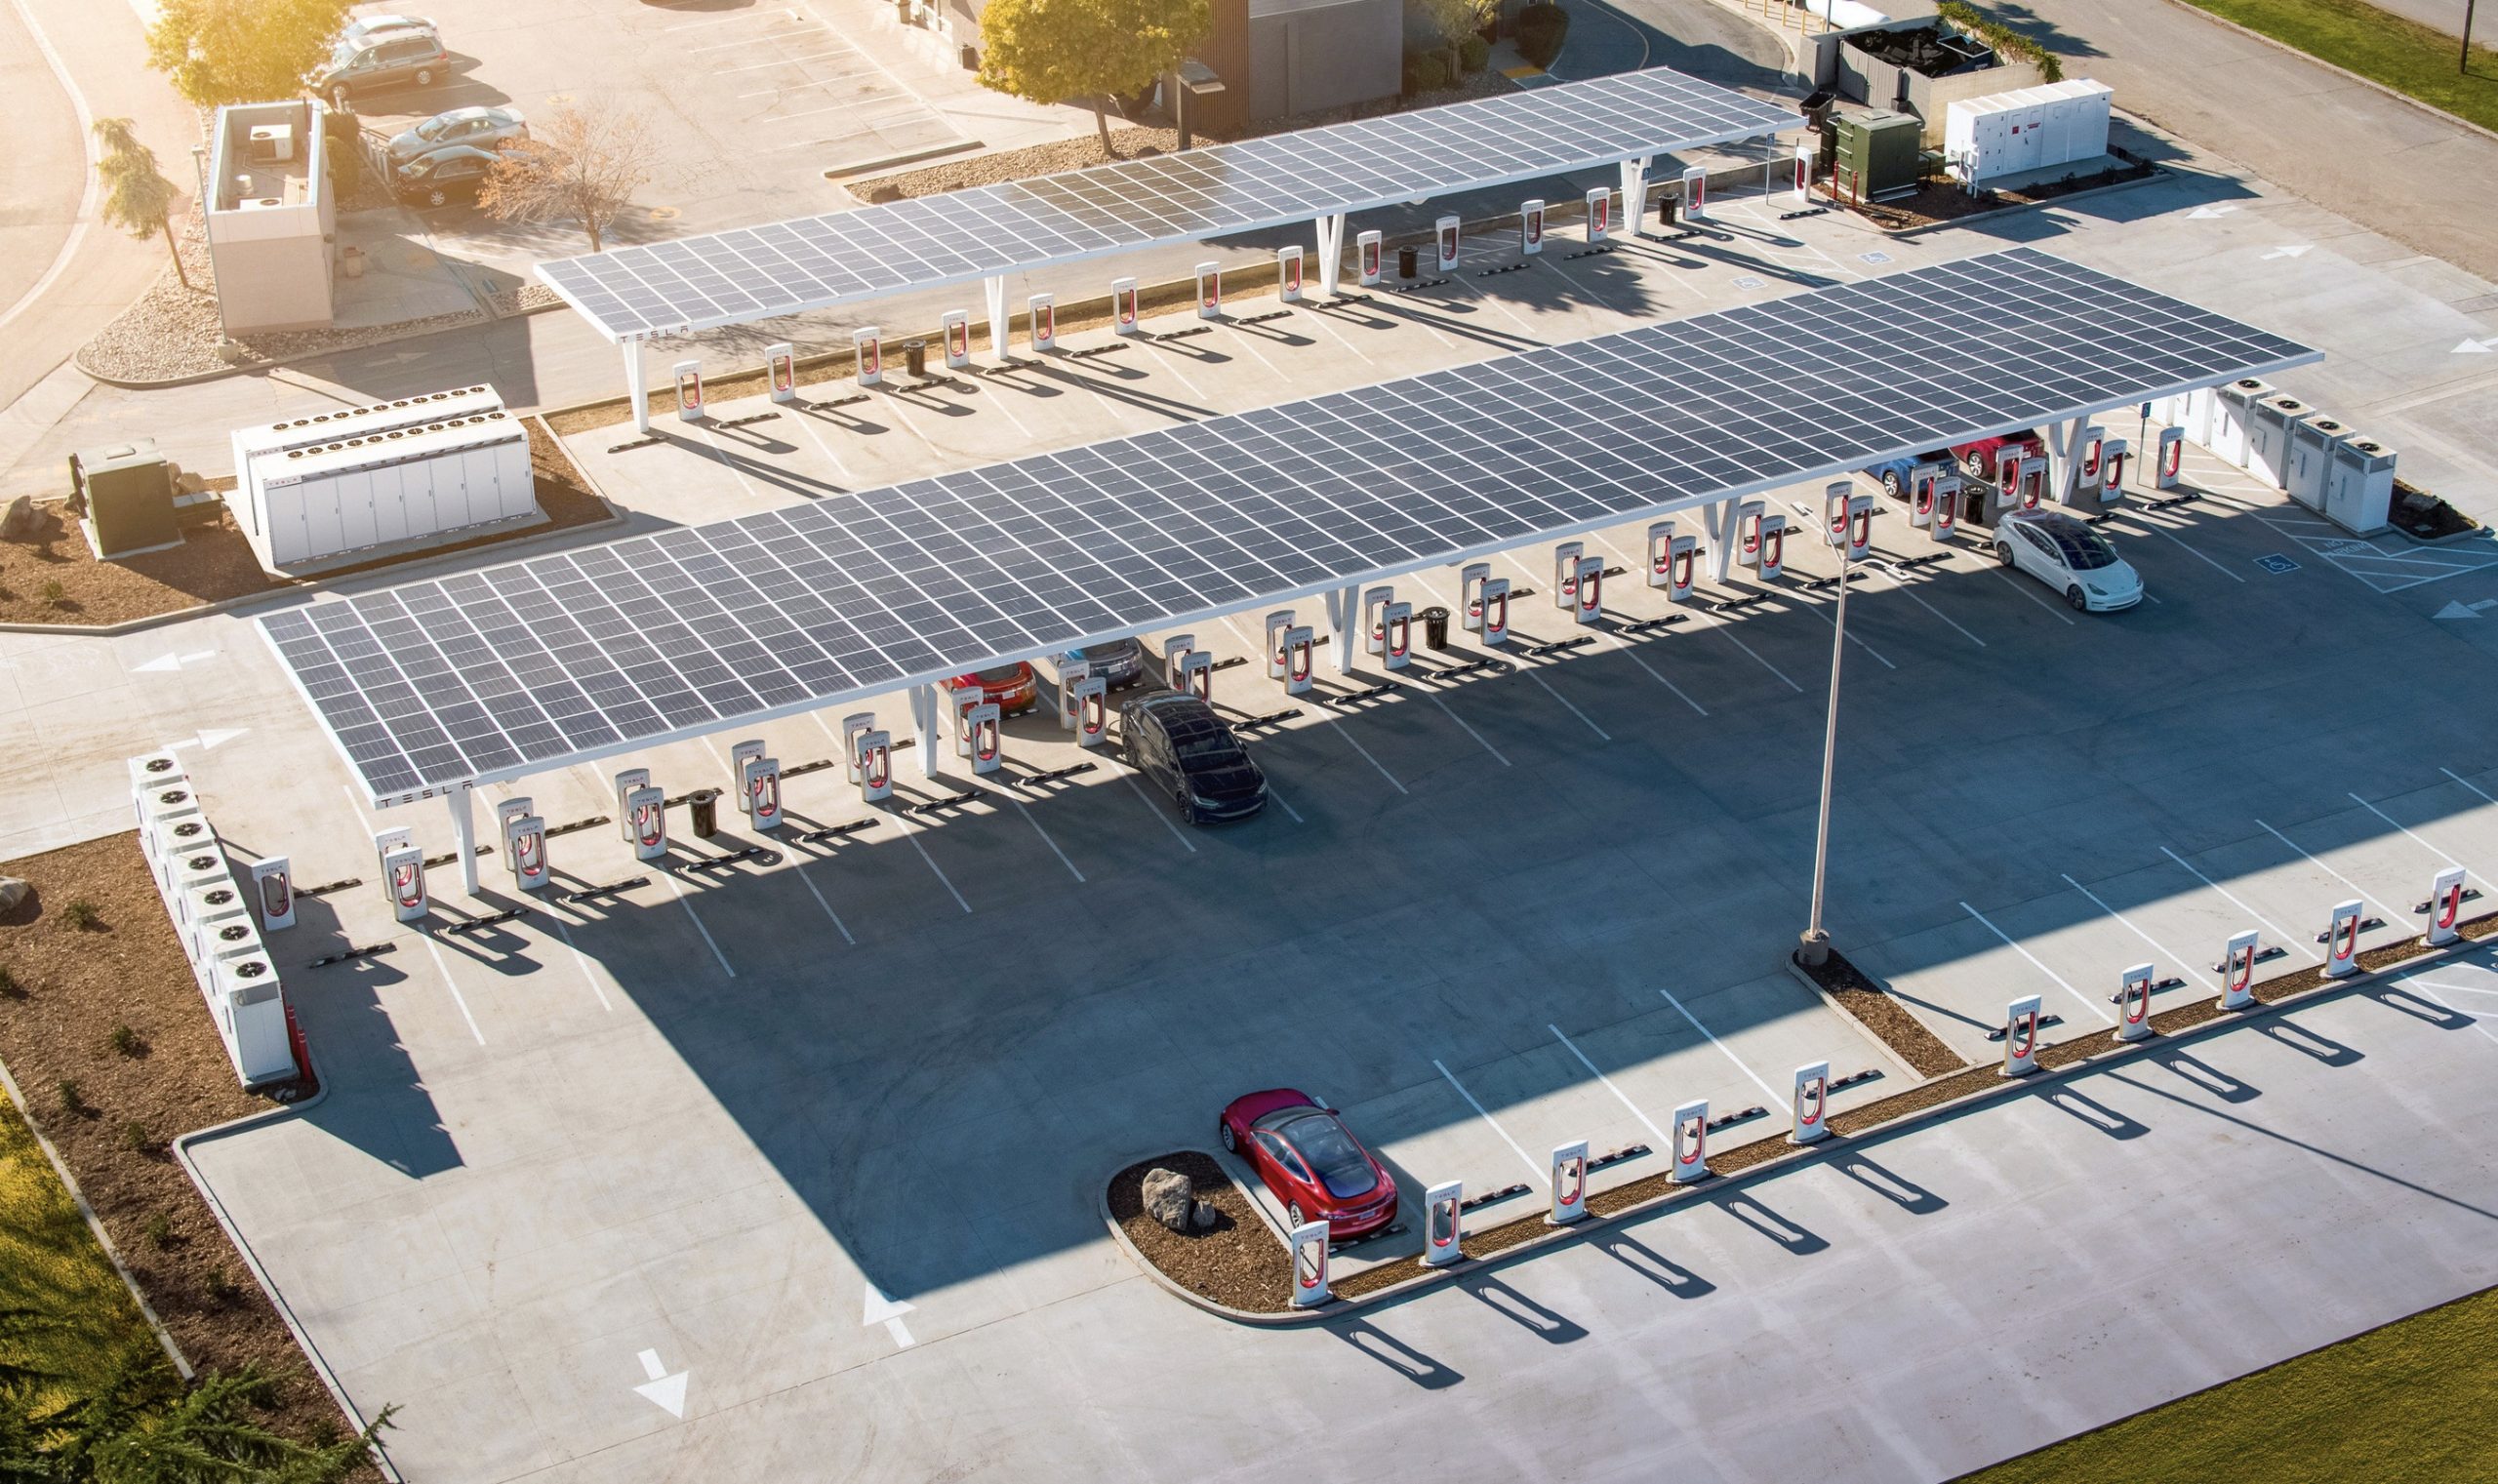 Tesla Superchargers need this one requirement before qualifying for Biden’s $7.5B subsidy